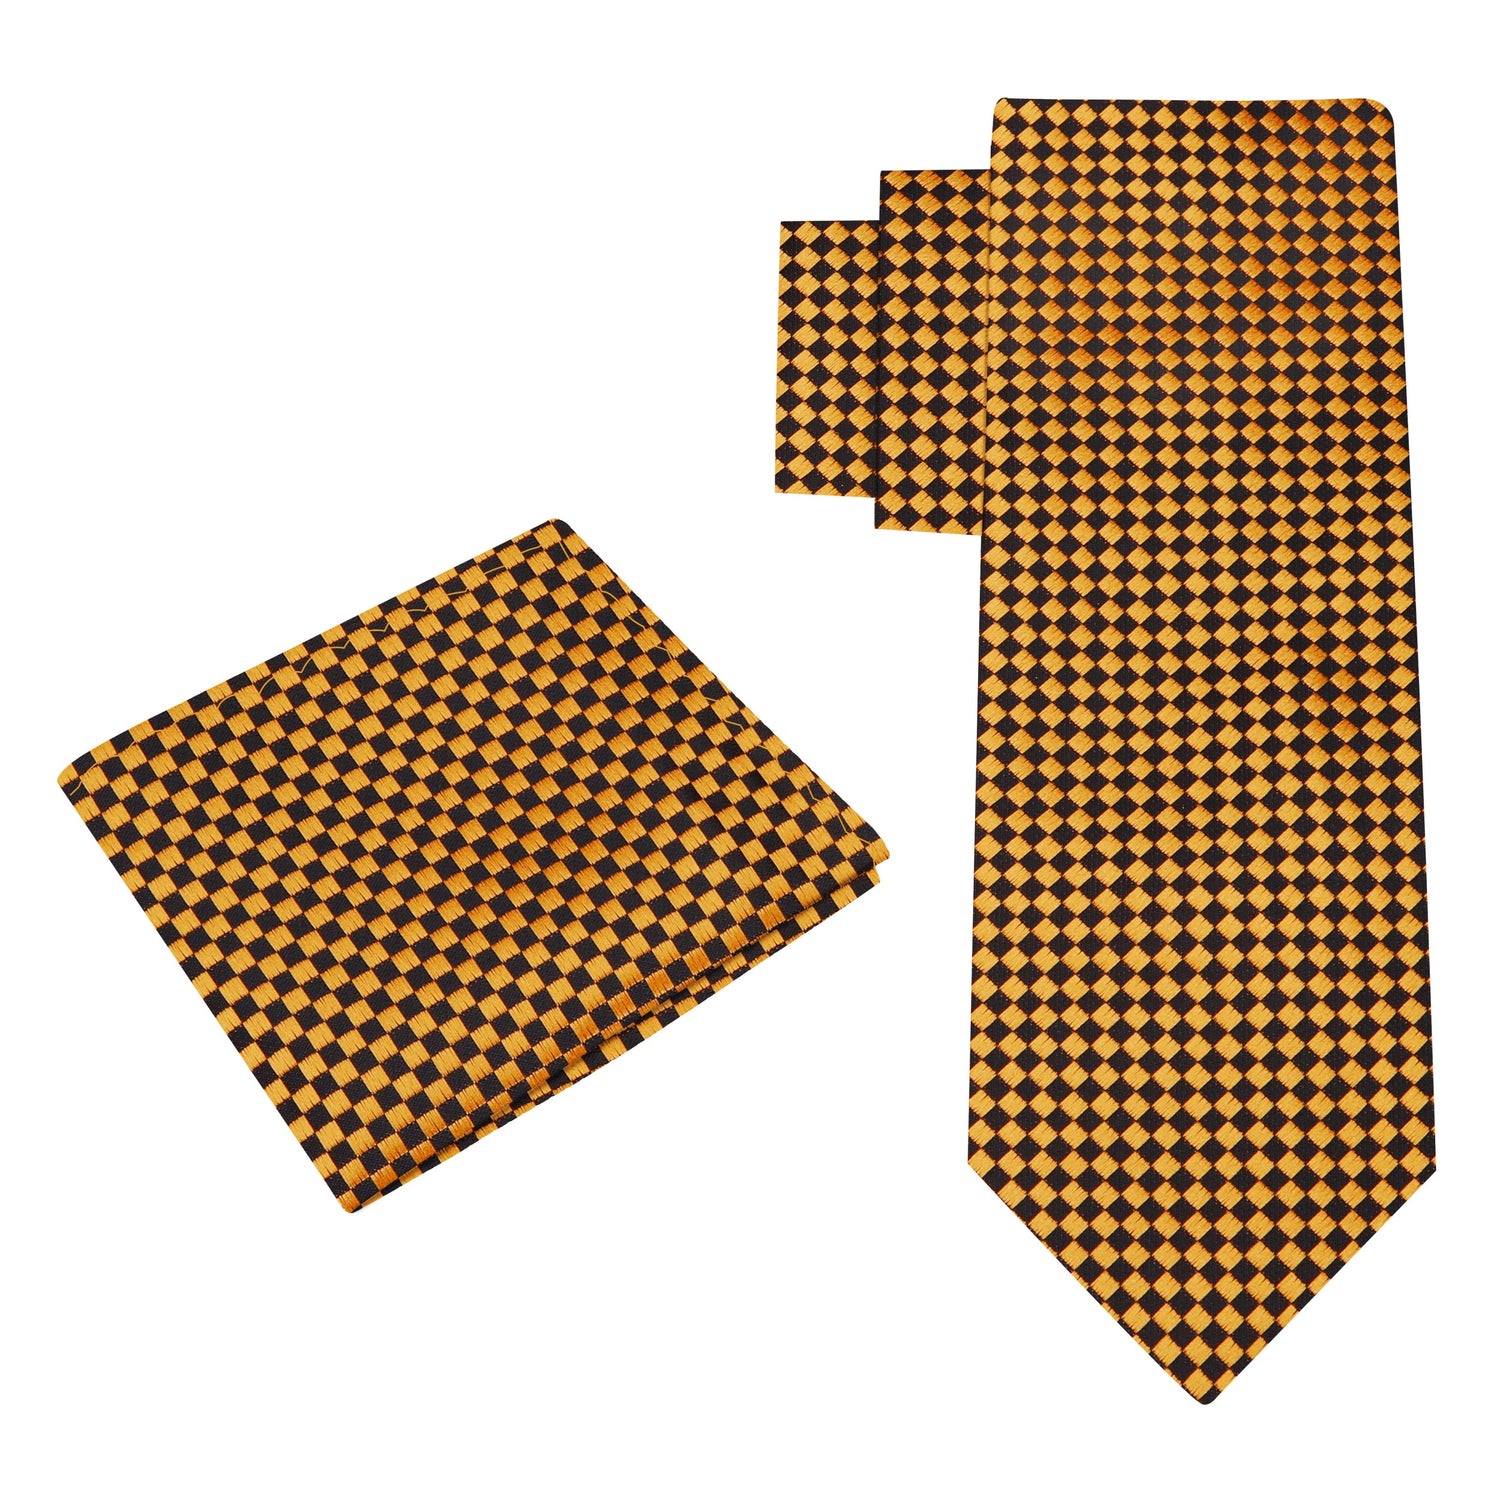 Alt View: Gold & Black Small Diamonds Necktie and Matching Pocket Square